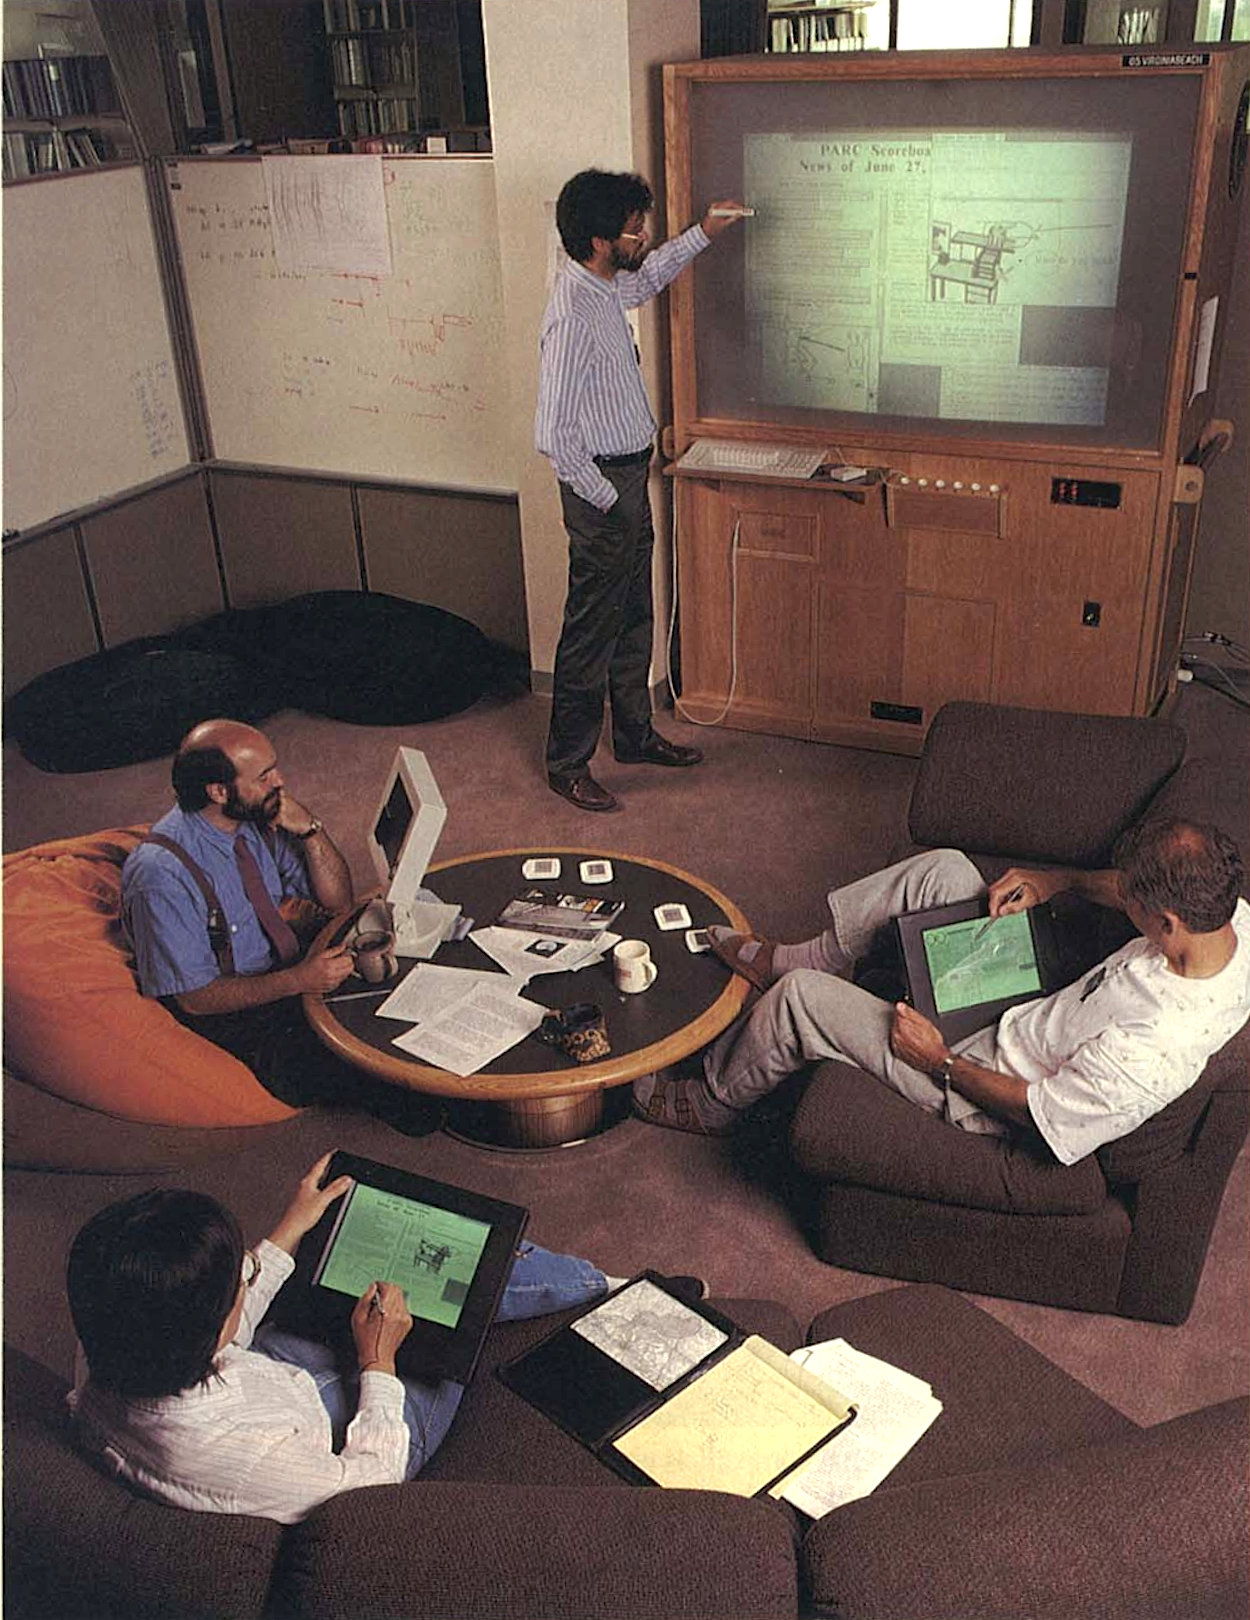 People working together in an ubiquitous computing environment